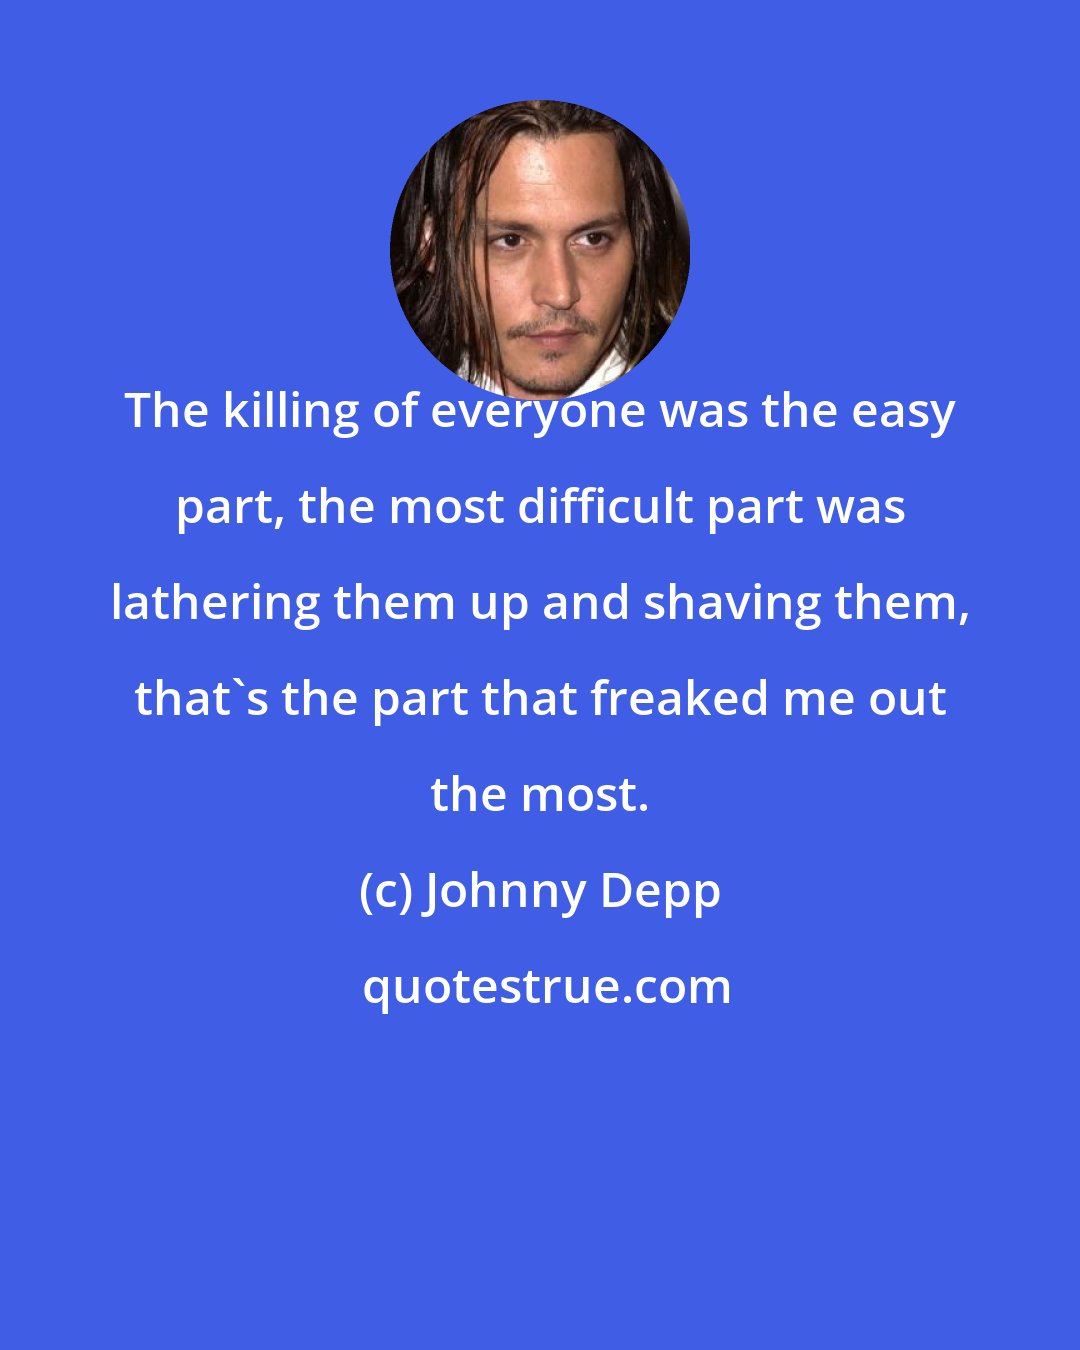 Johnny Depp: The killing of everyone was the easy part, the most difficult part was lathering them up and shaving them, that's the part that freaked me out the most.